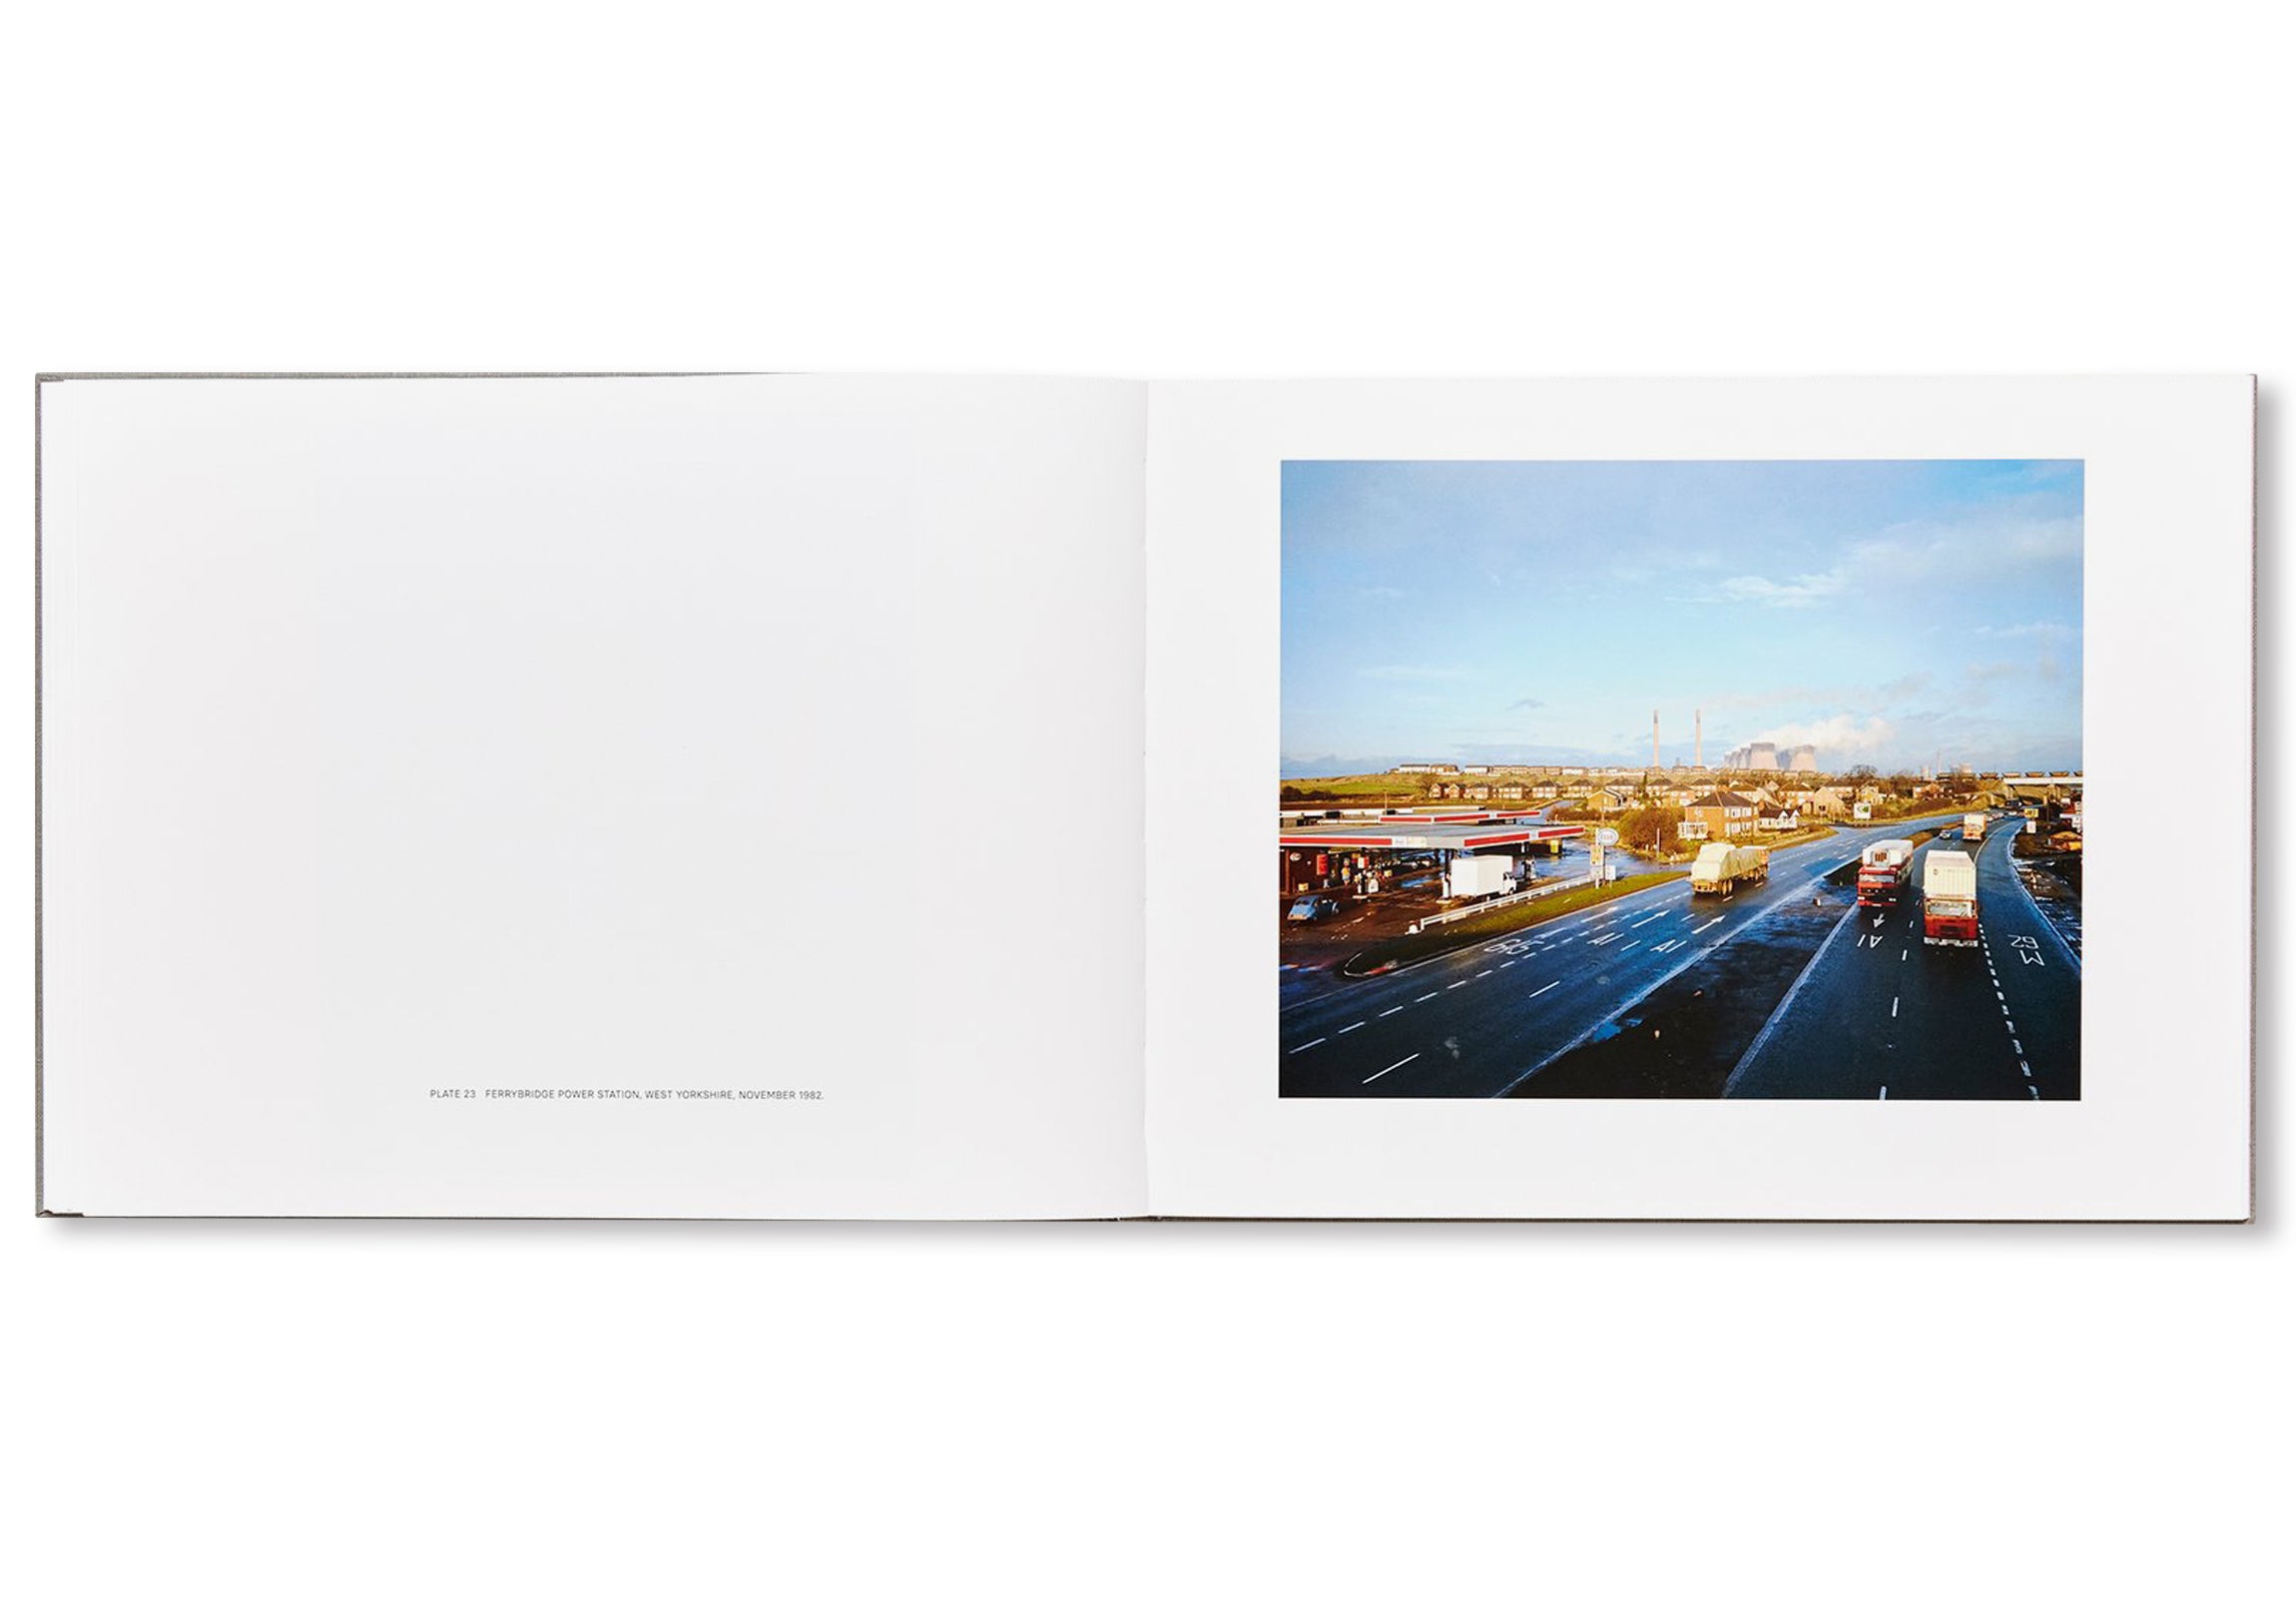 A1 - THE GREAT NORTH ROAD by Paul Graham [SIGNED]